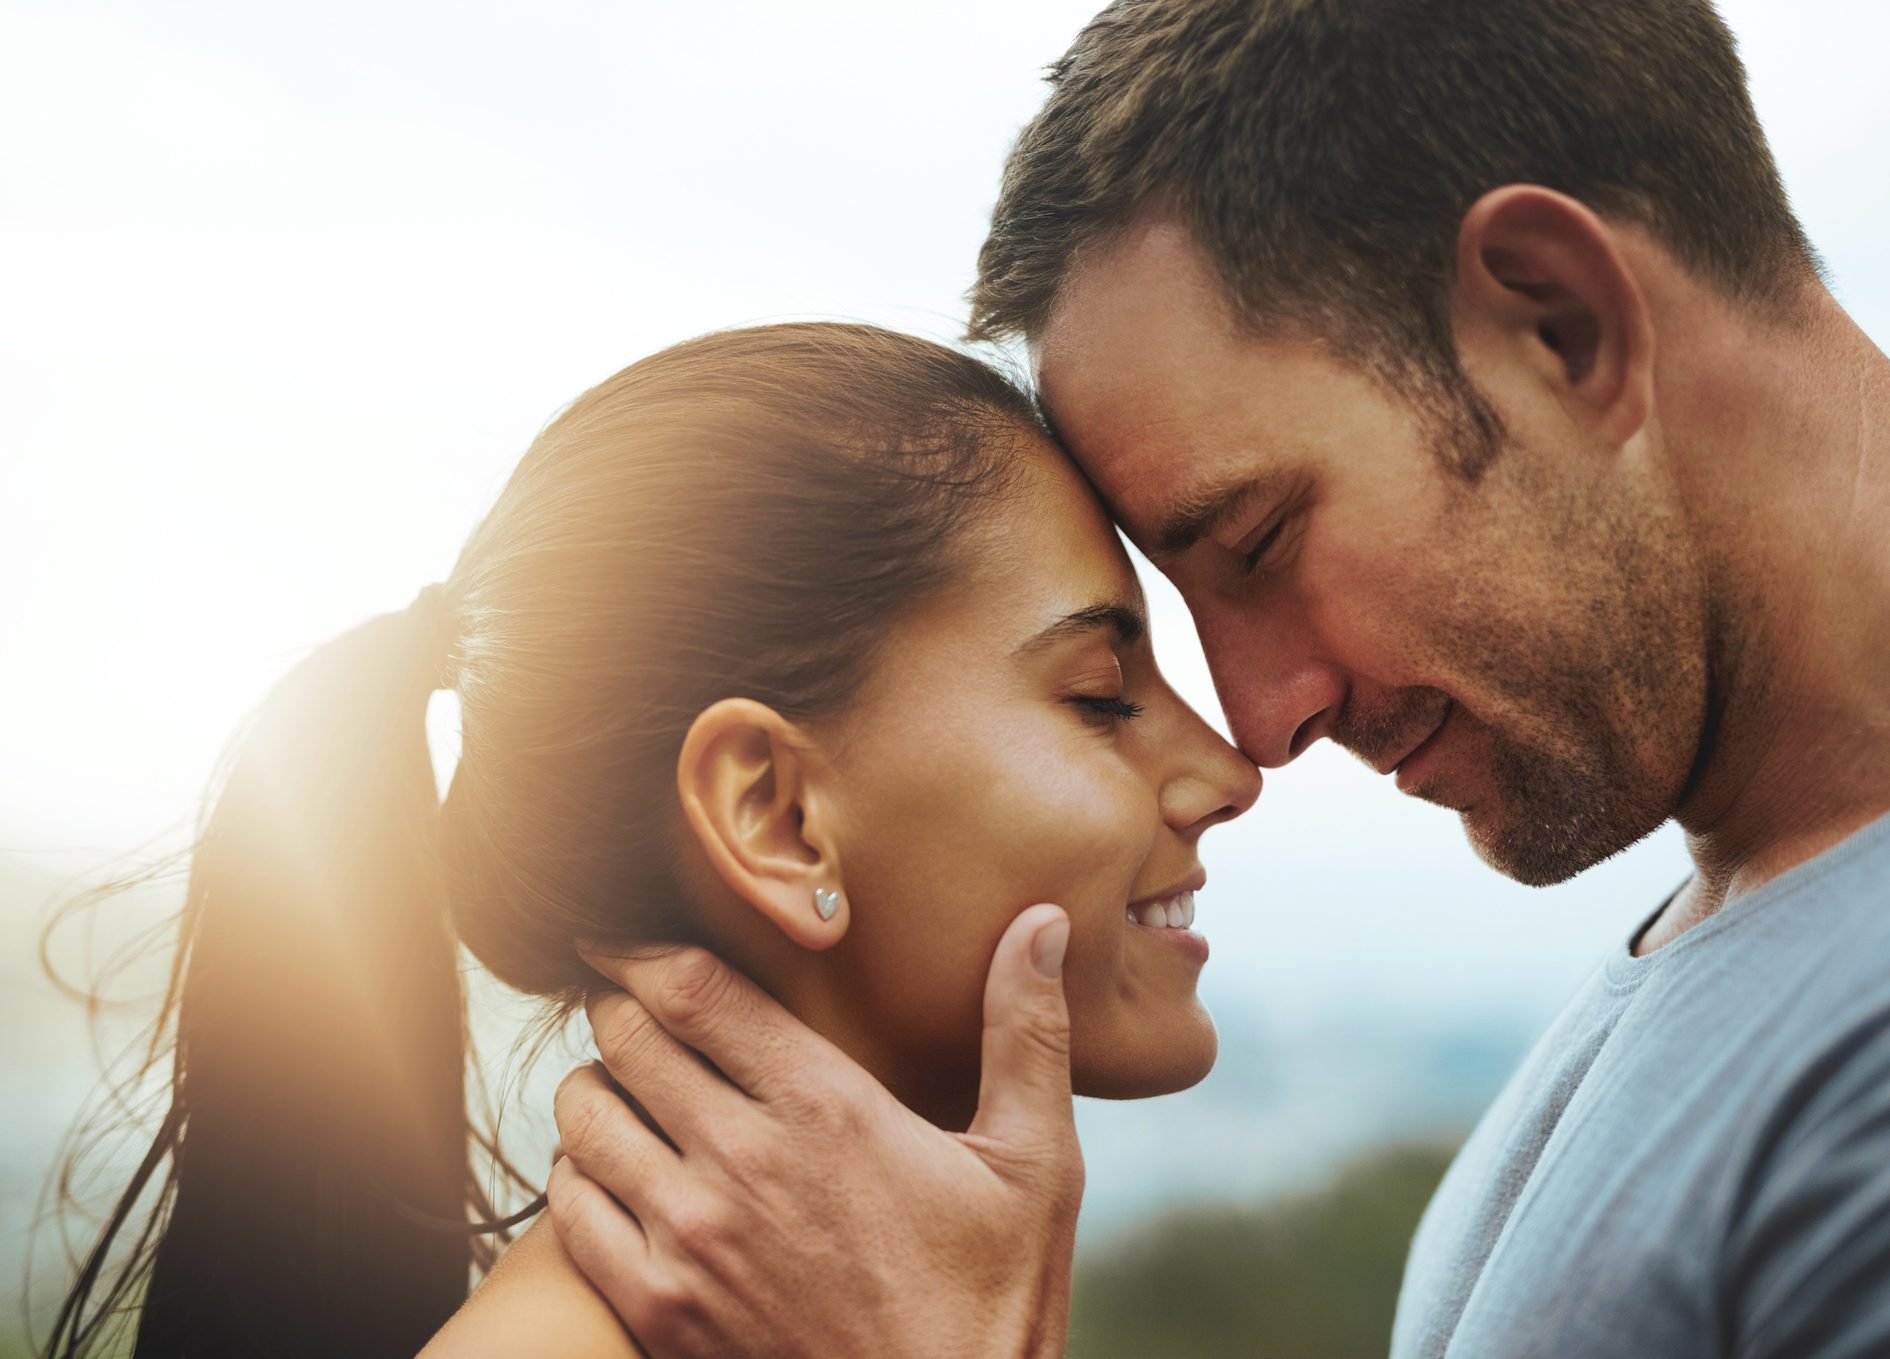 10 Ways To Make Your Partner Feel Loved